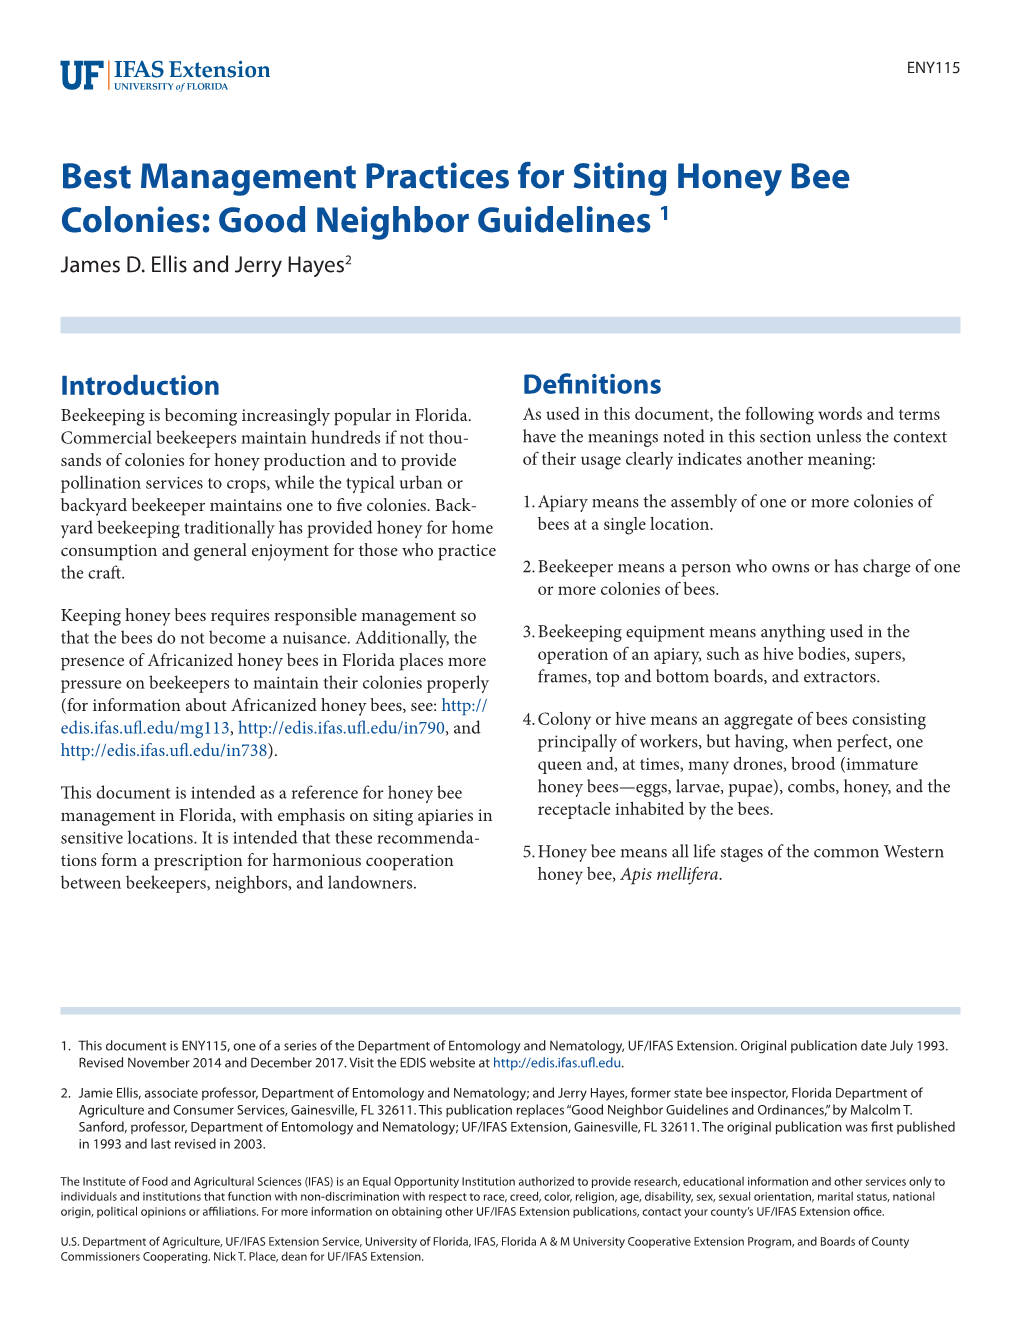 Best Management Practices for Siting Honey Bee Colonies: Good Neighbor Guidelines 1 James D